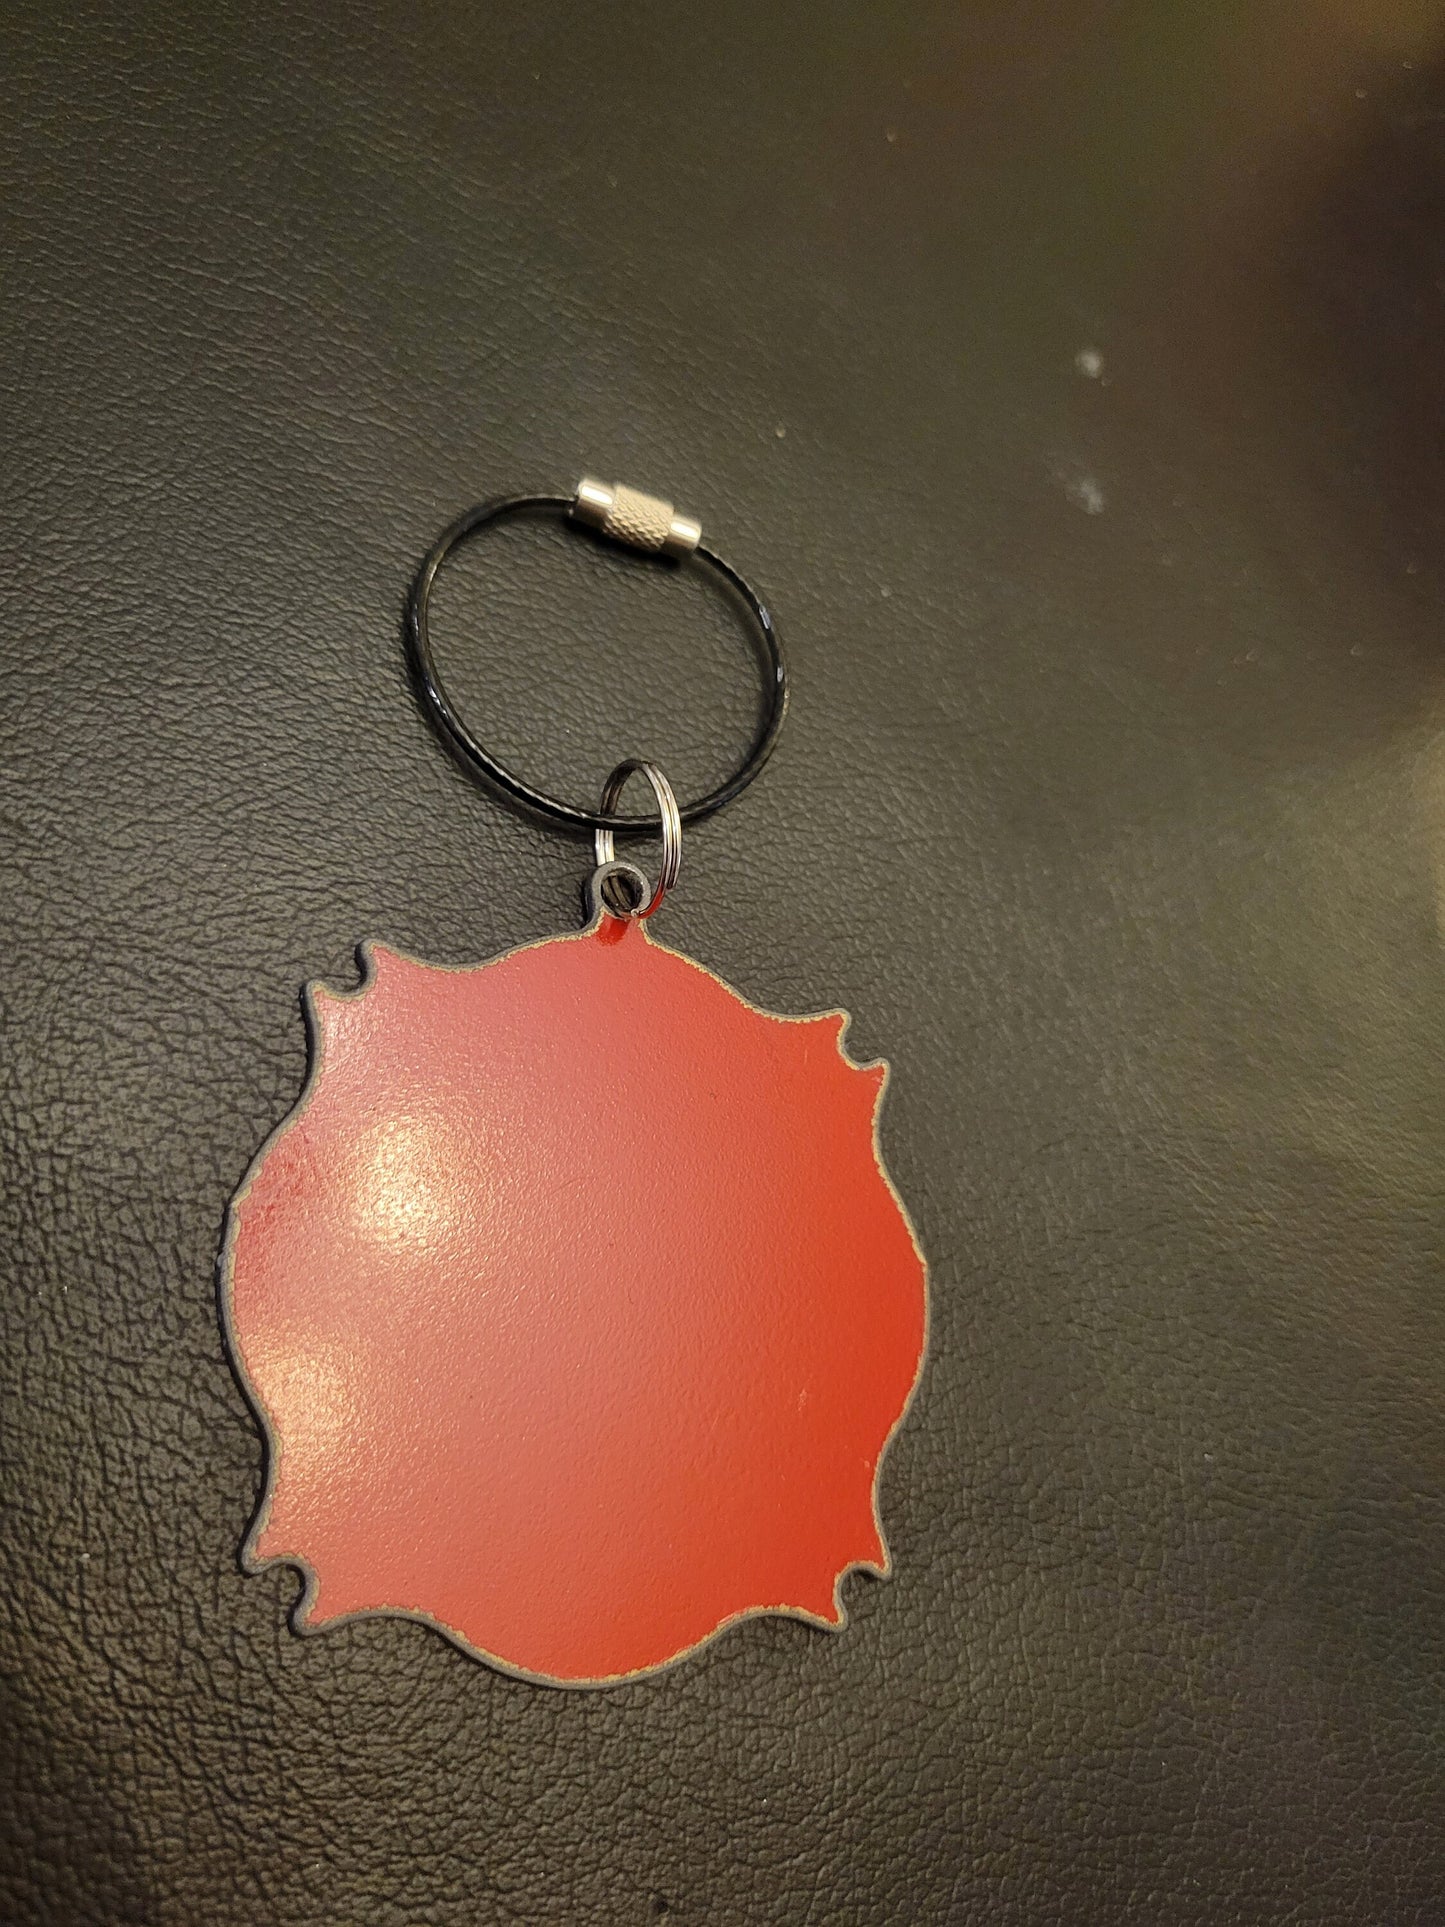 Plain Red Maltese "RED Steel" Tag